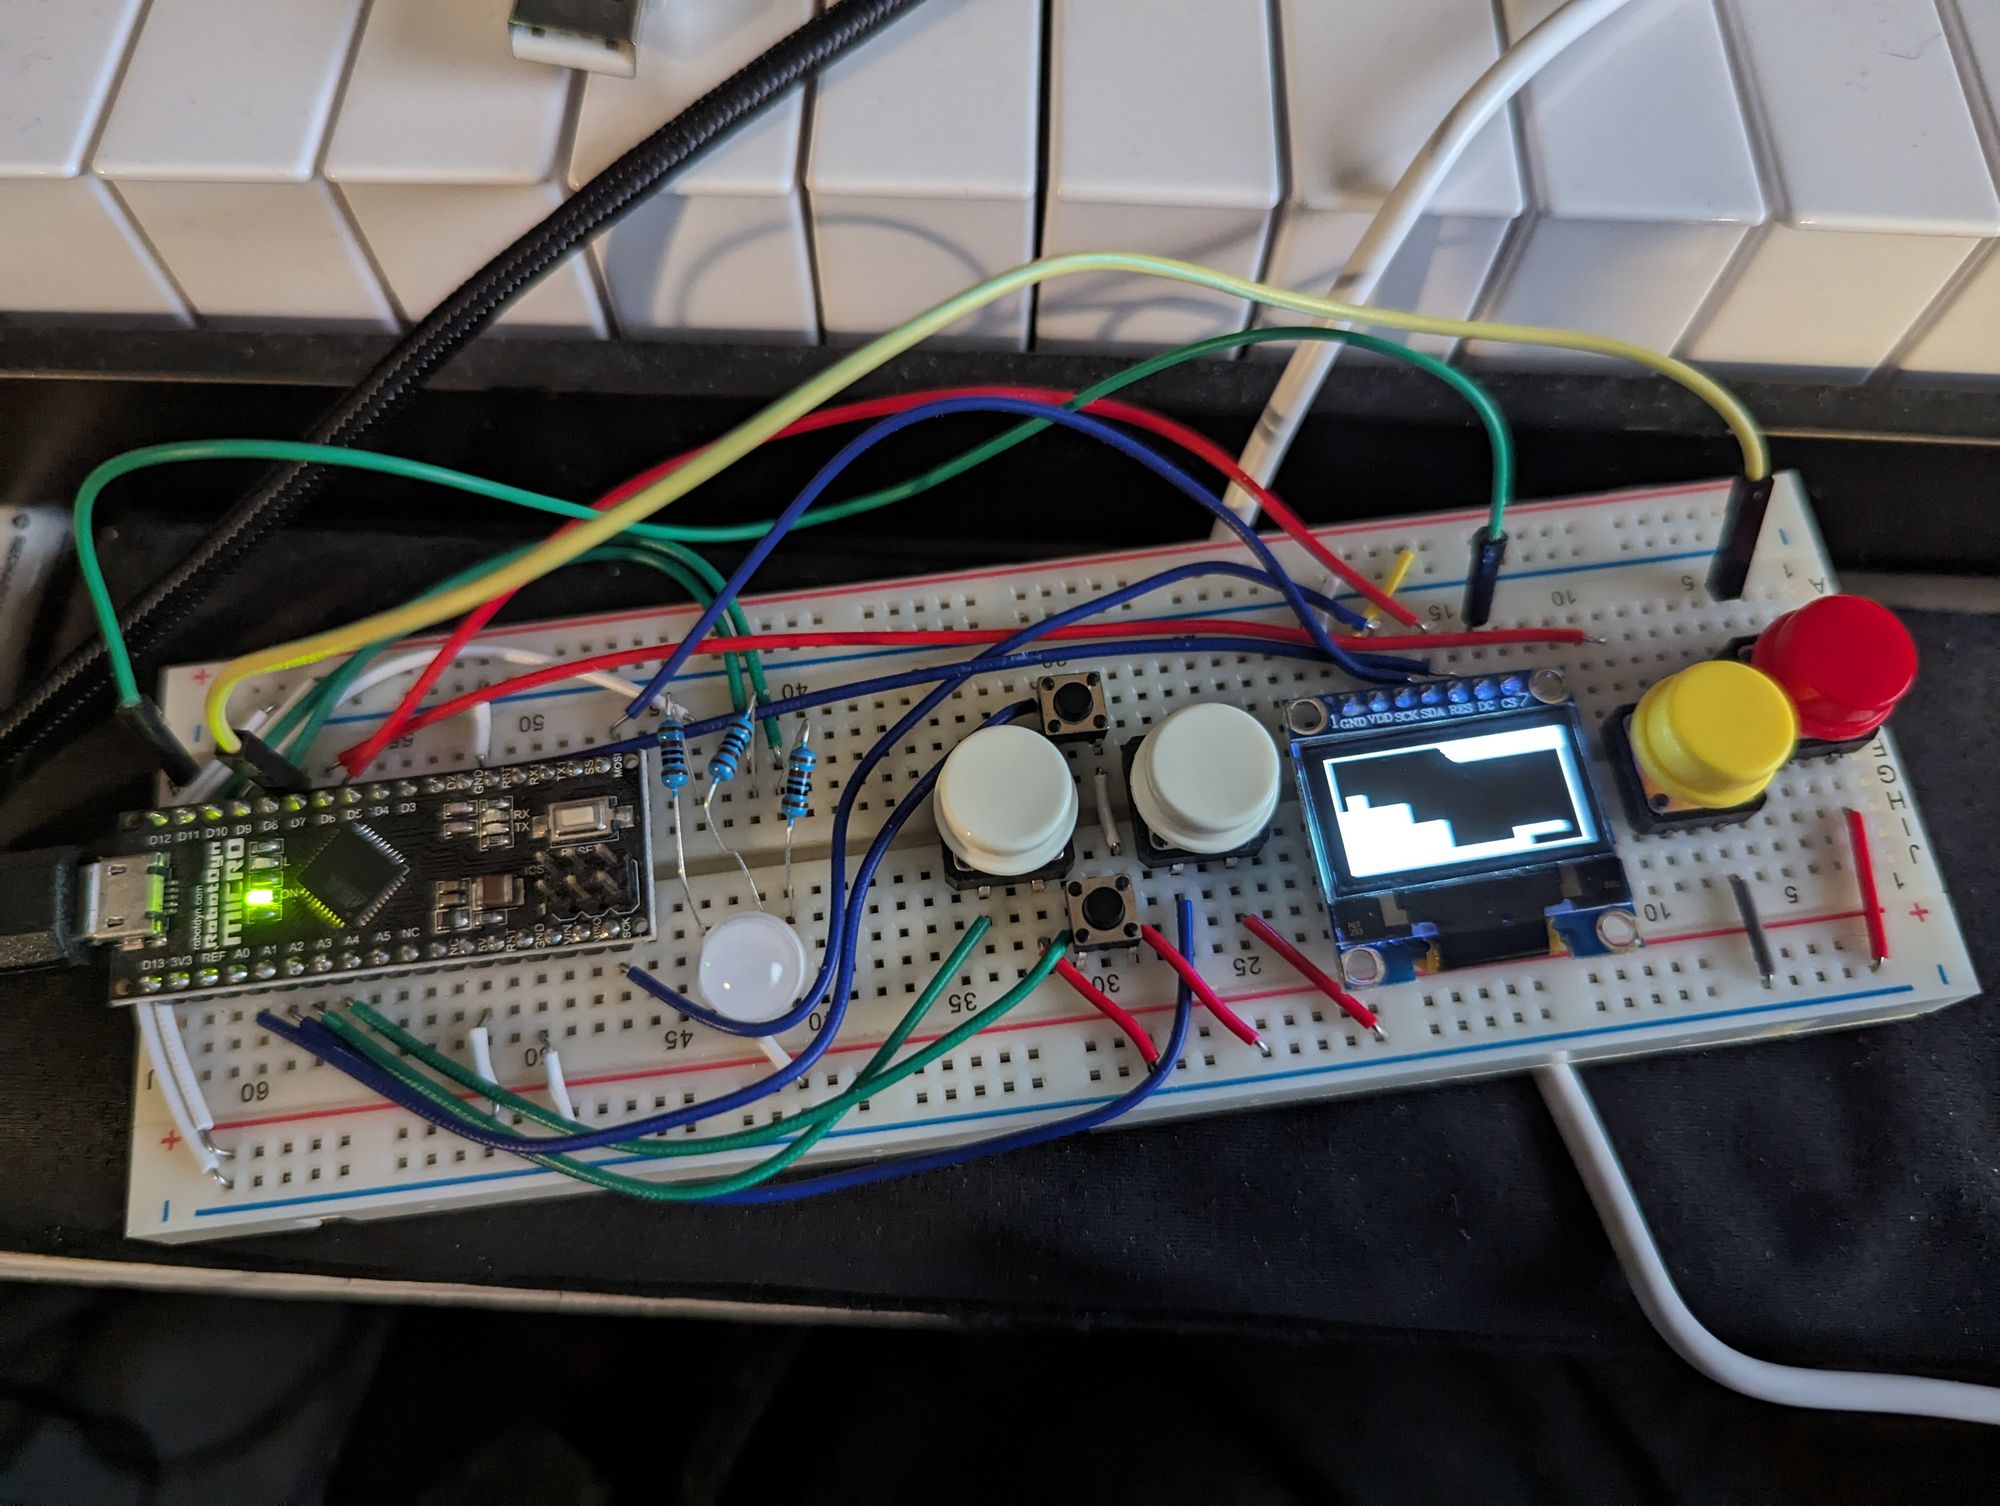 My breadboard Arduboy ended up looking like this!